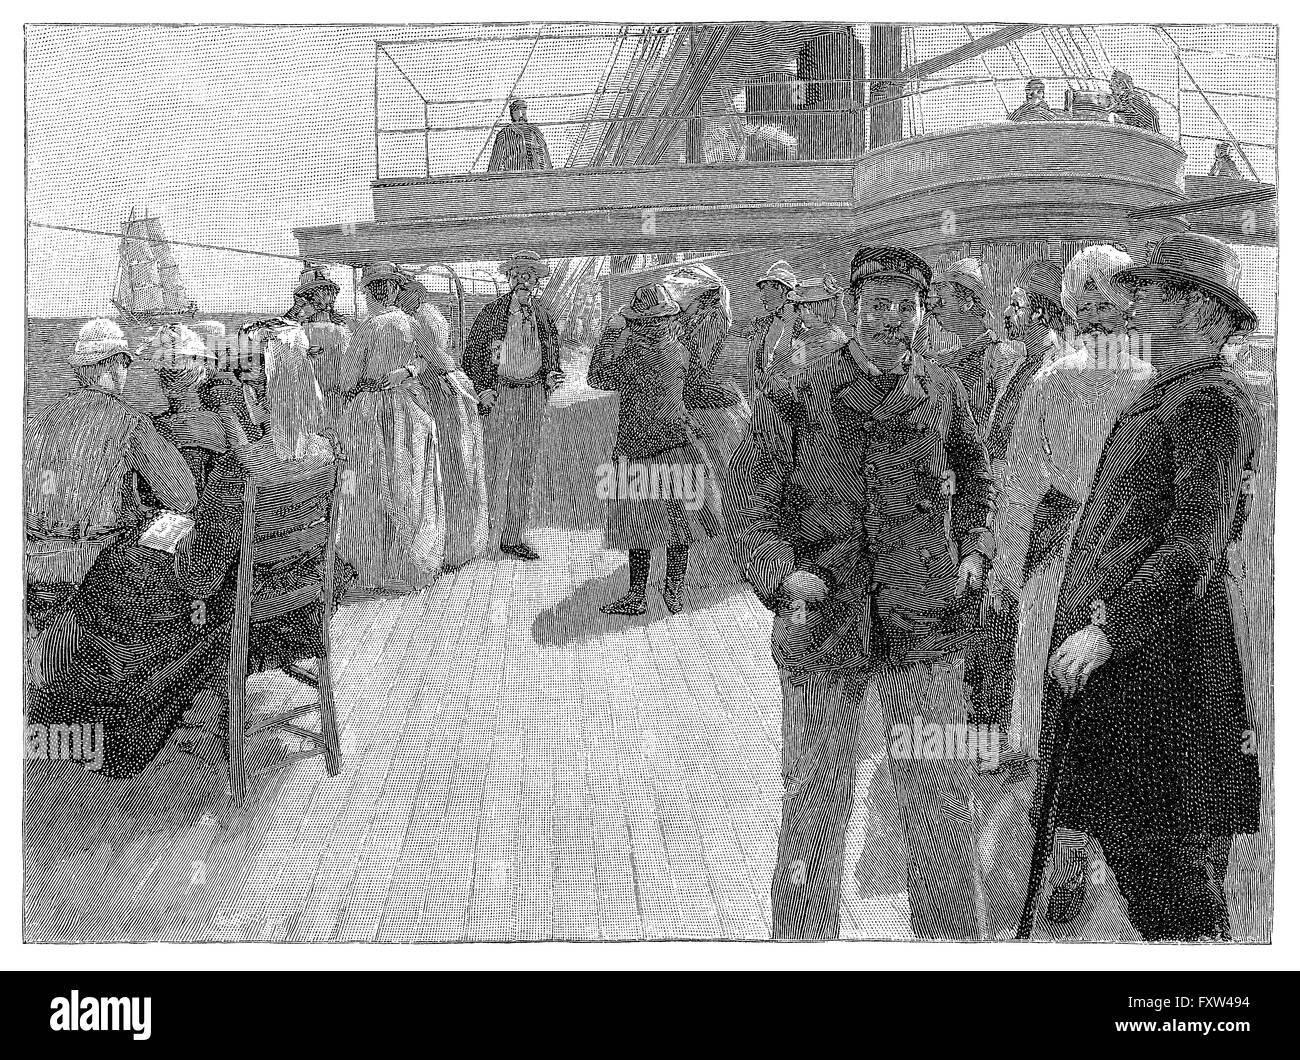 1891 black and white engraving of Victorian passengers aboard the promenade deck of a passenger ship. Stock Photo